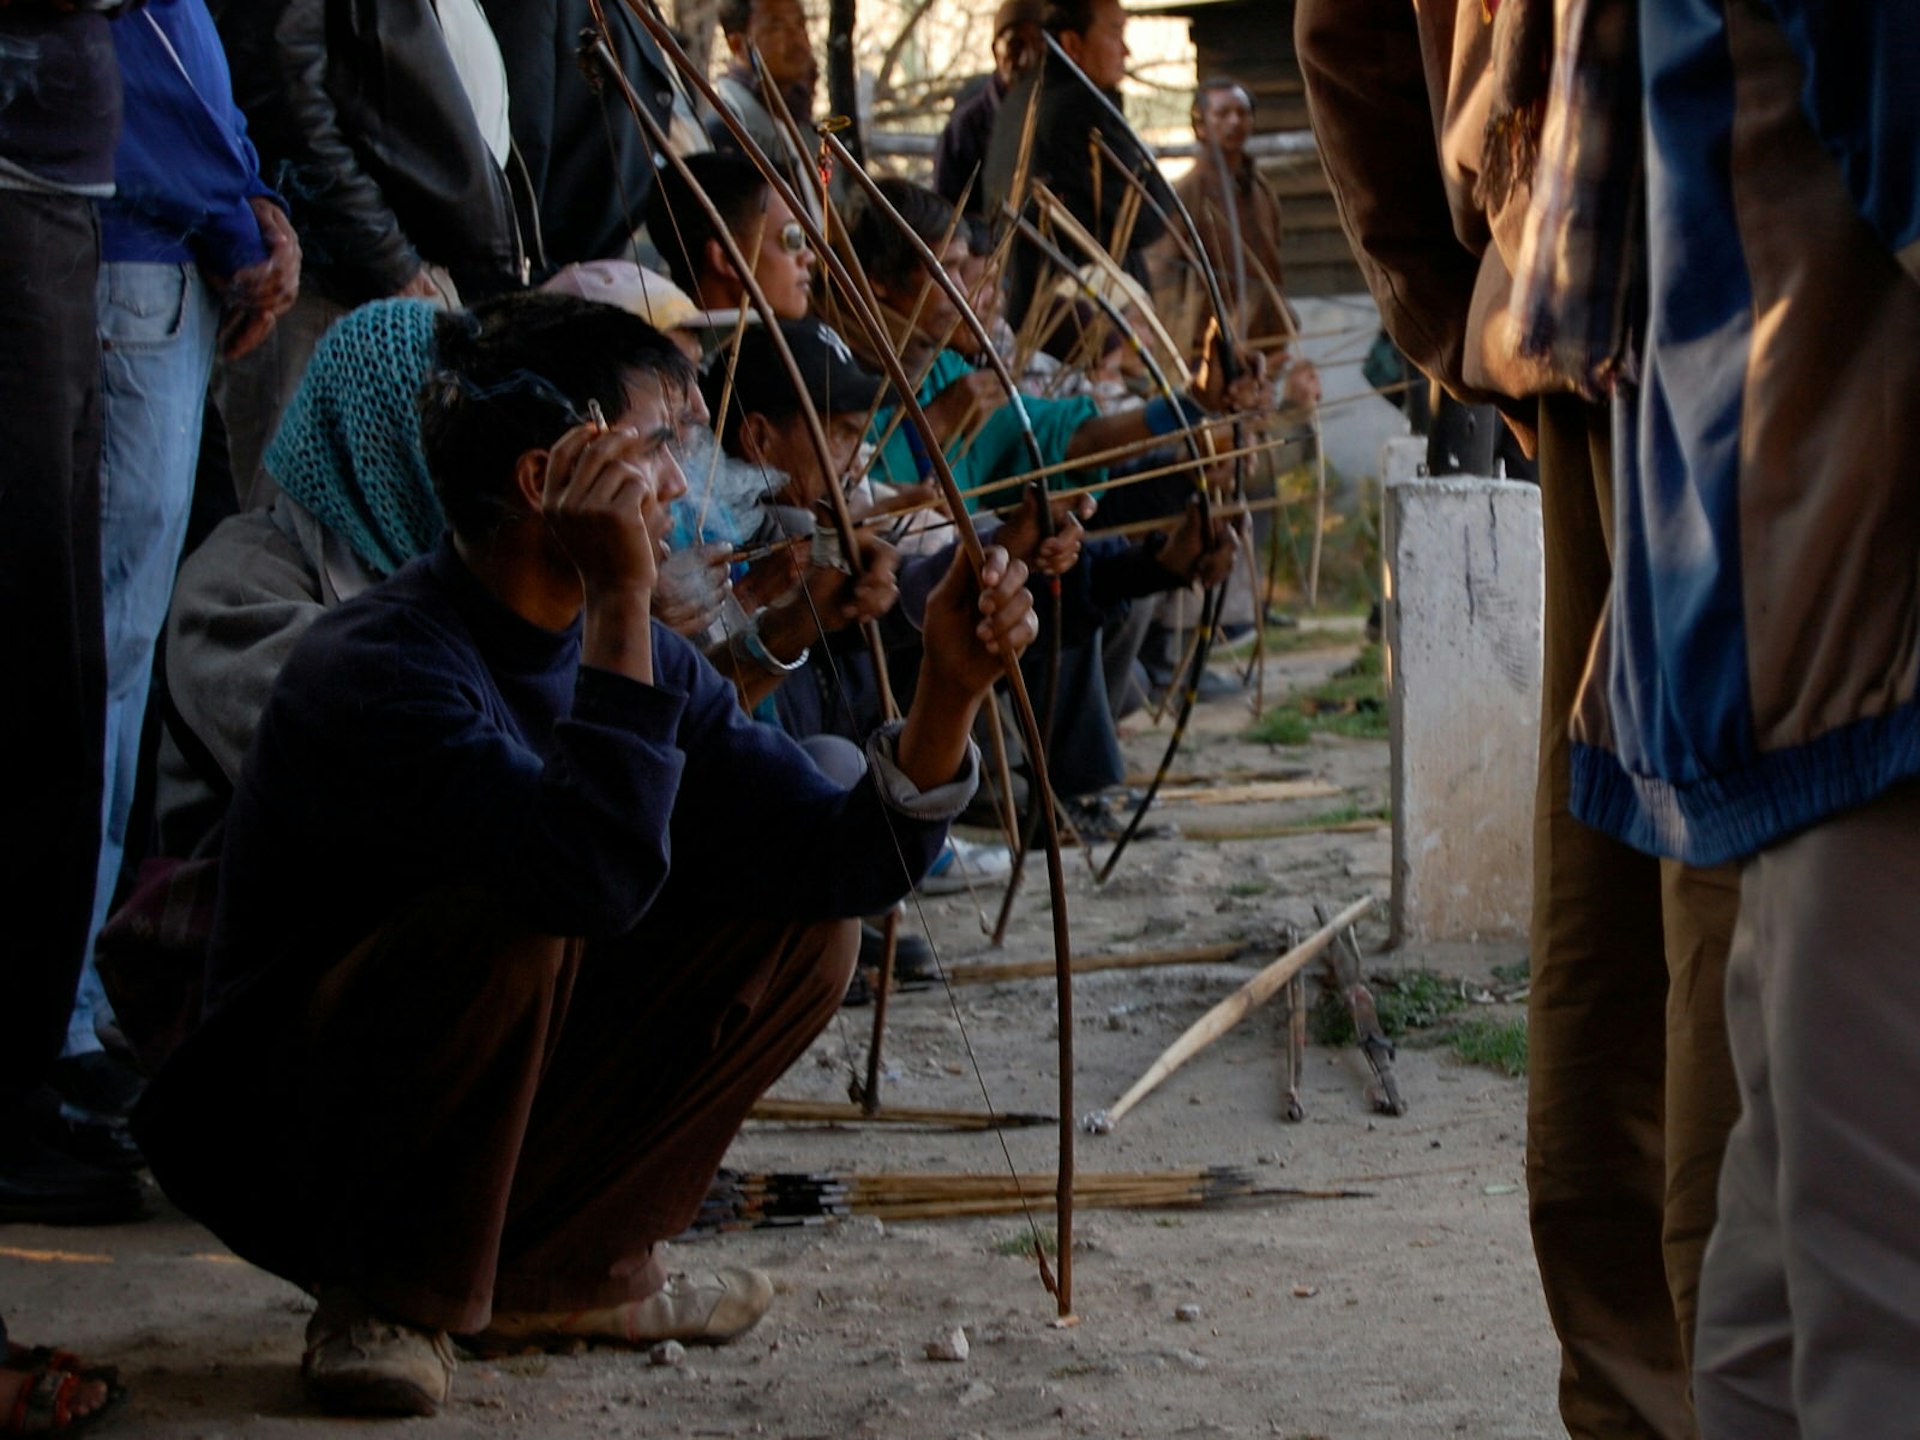 Khasi archers weigh up the competition in Shillong © Satish Krishnamurthy / CC BY 2.0